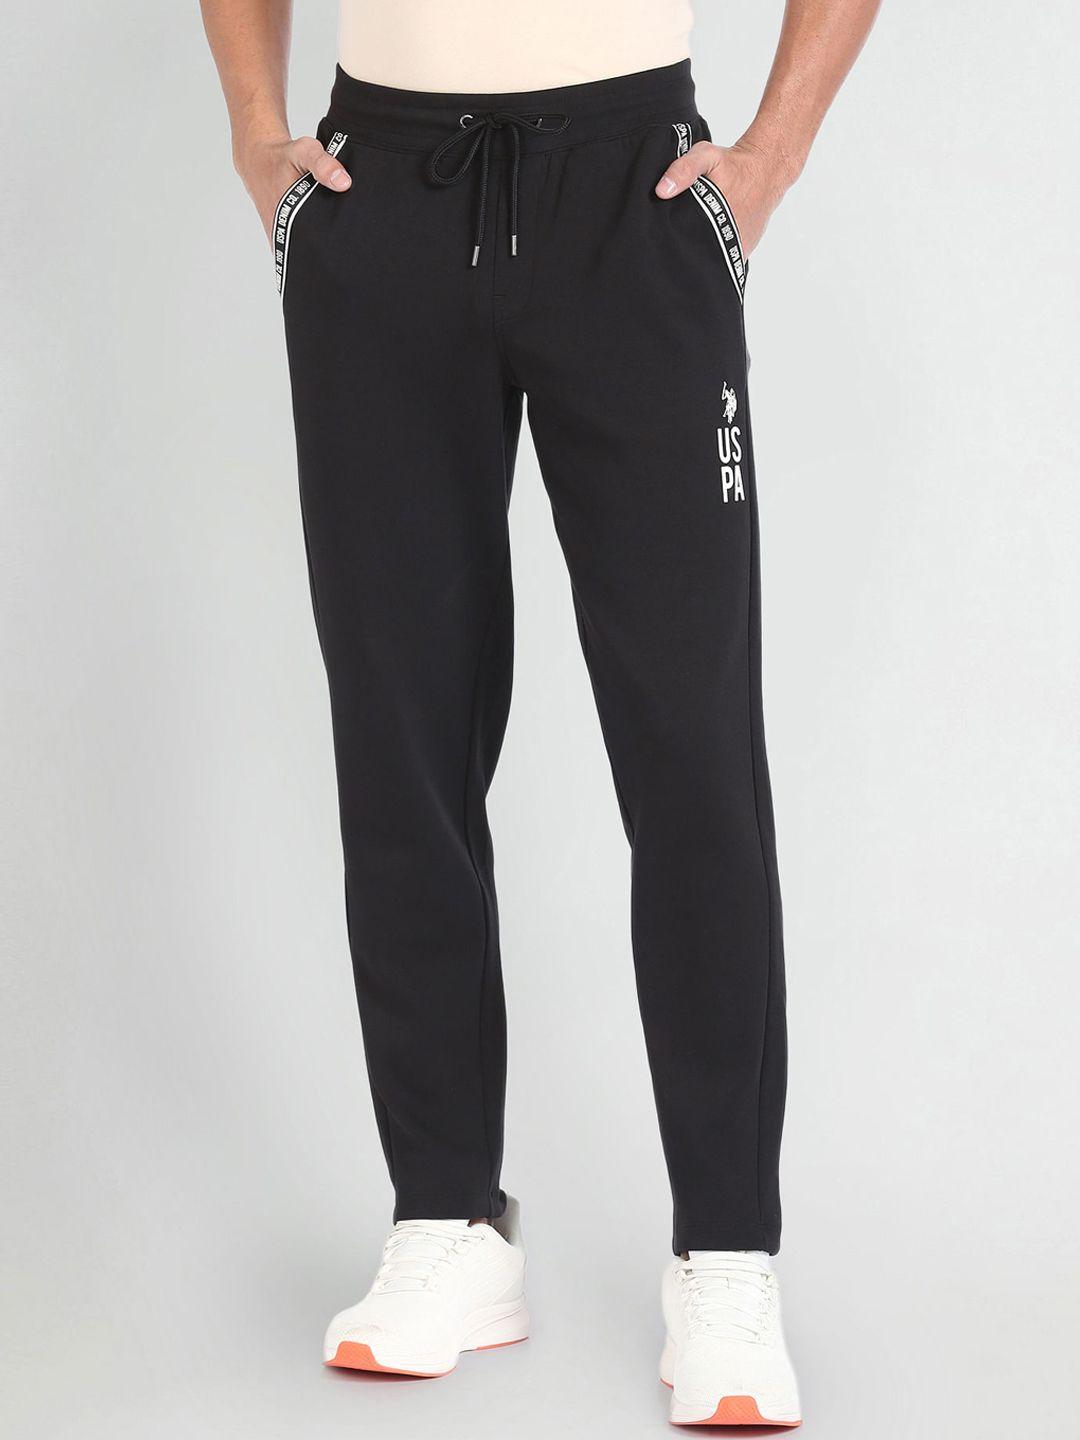 u.s.-polo-assn.-denim-co.-men-brand-tape-mid-rise-straight-fit-track-pants